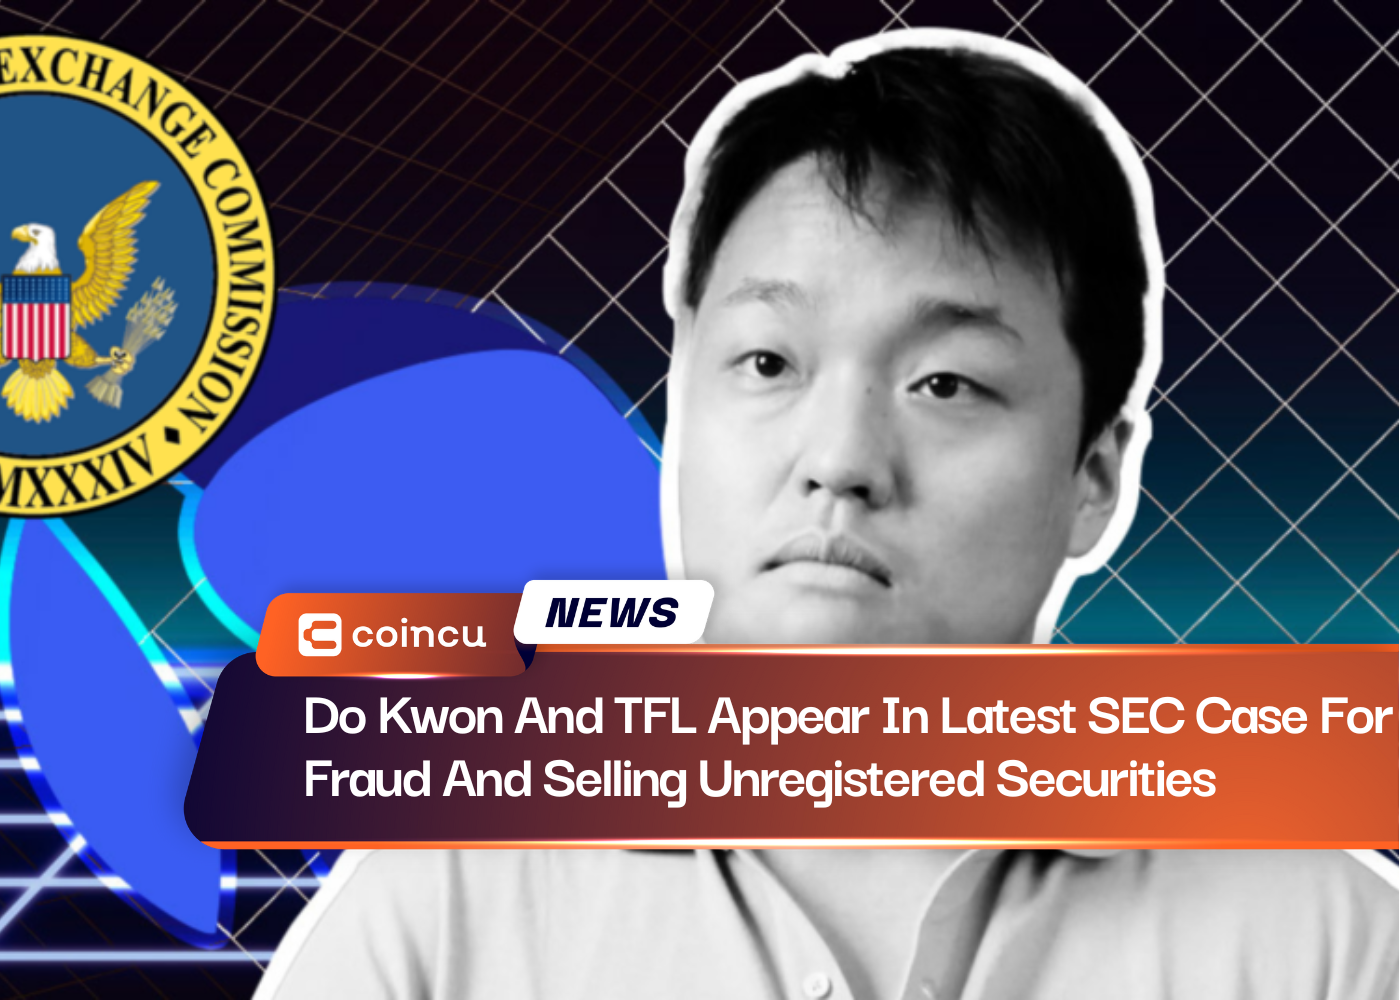 Do Kwon And TFL Appear In Latest SEC Case For Fraud And Selling Unregistered Securities